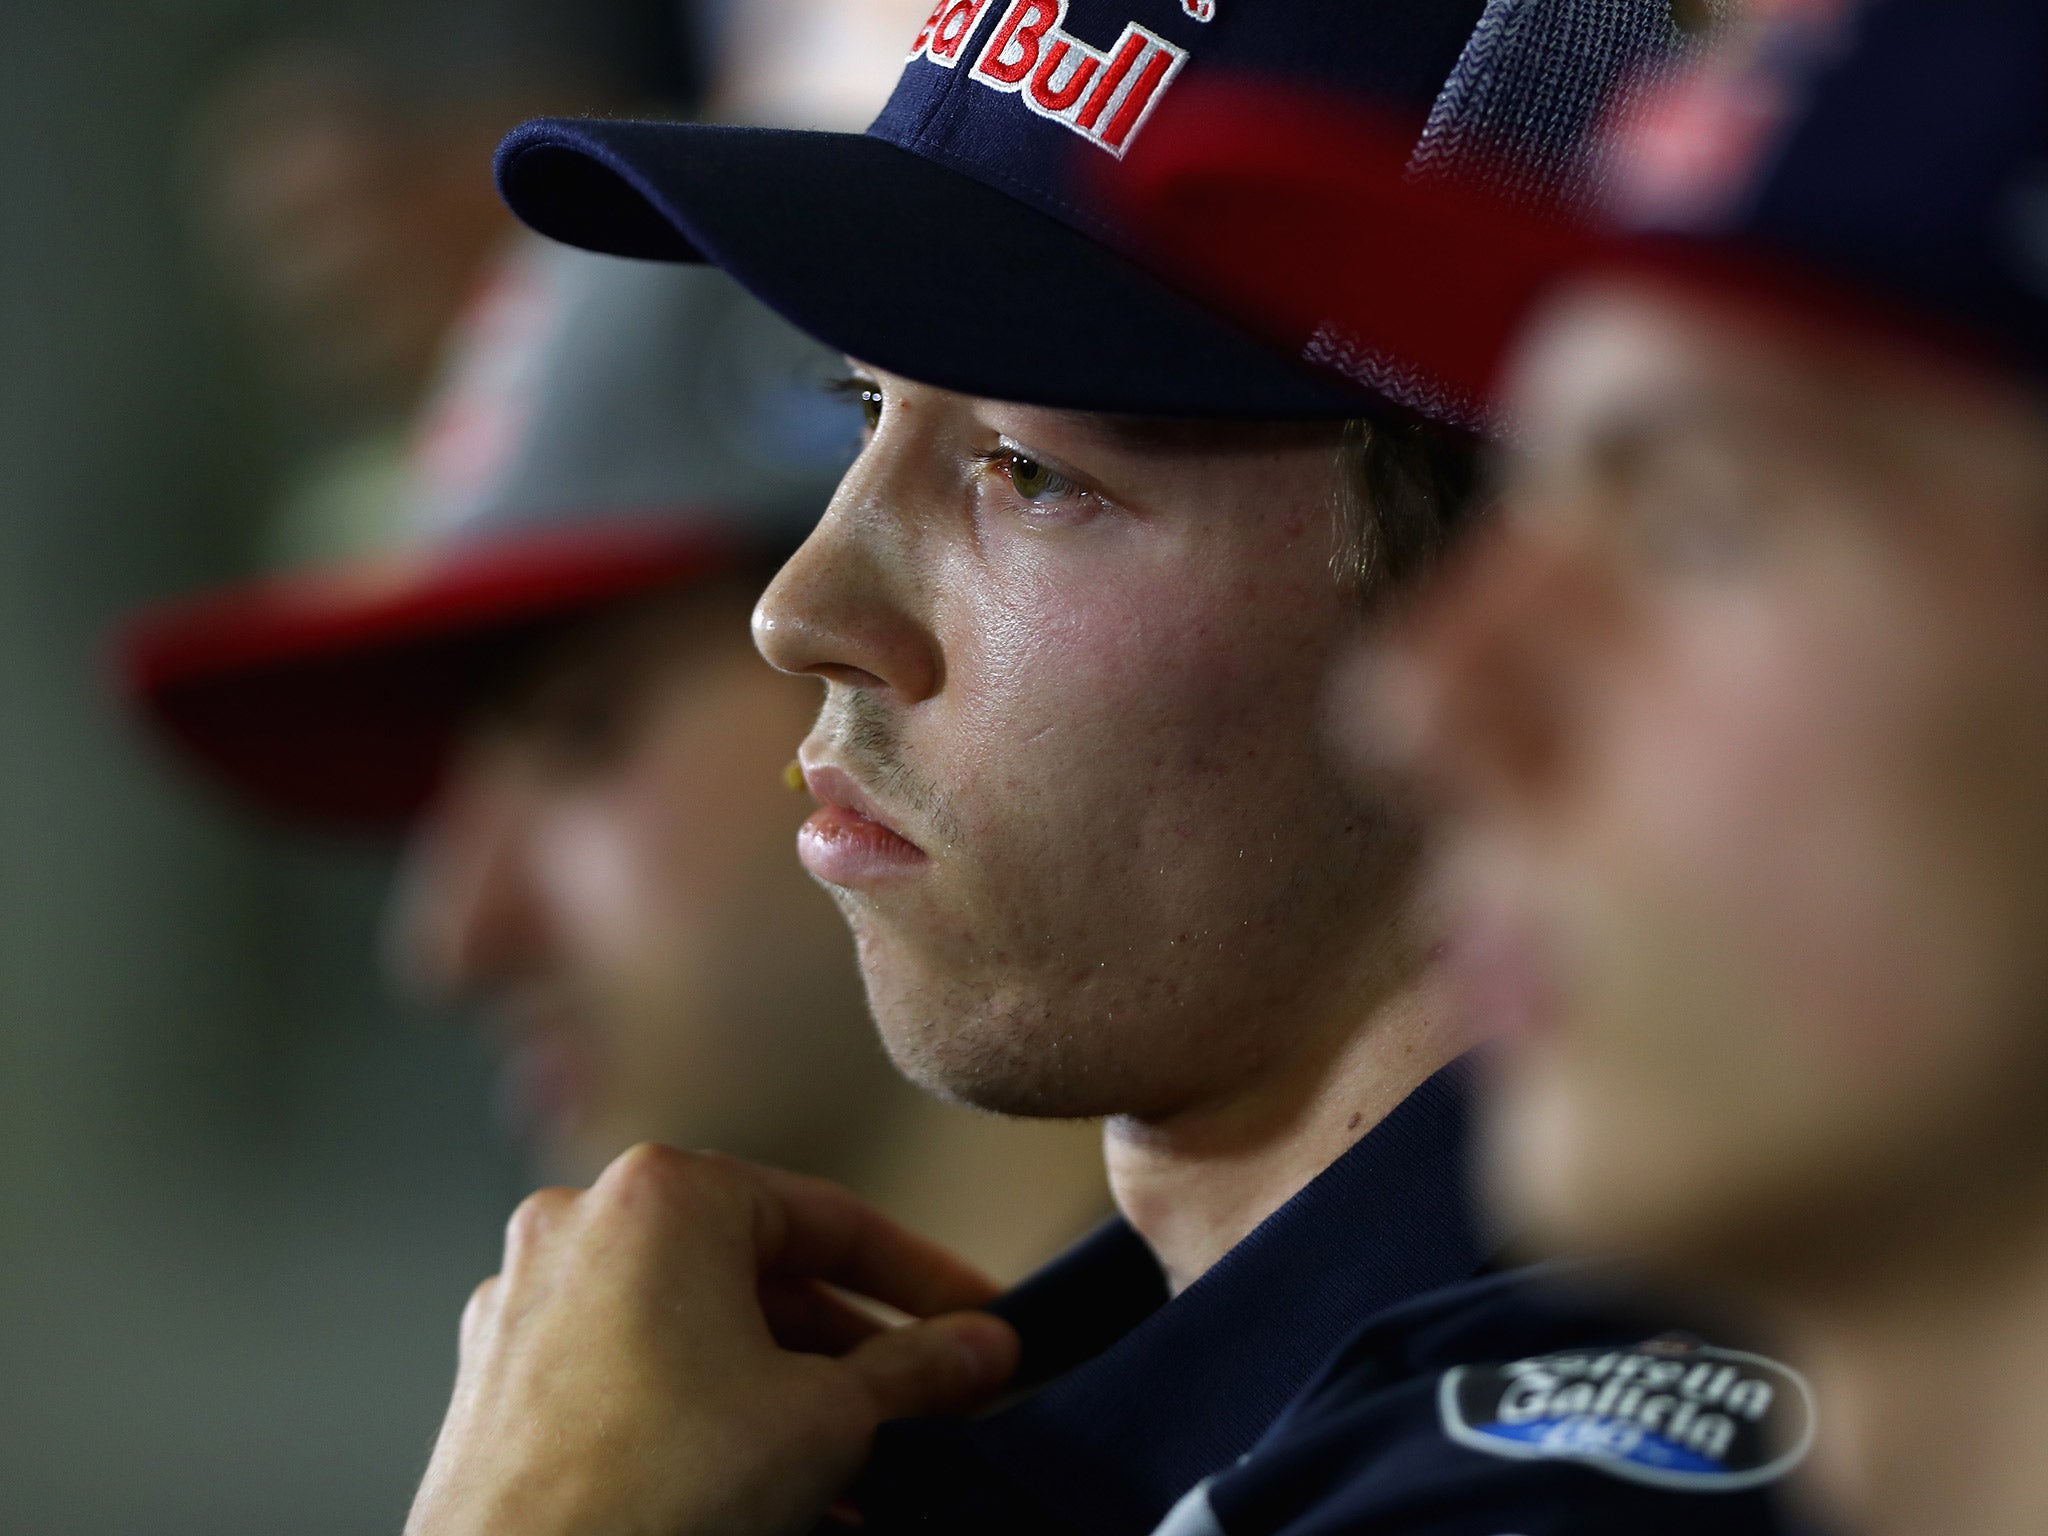 Daniil Kvyat was moved to Red Bull after an incident with Sebastian Vettel in Russia